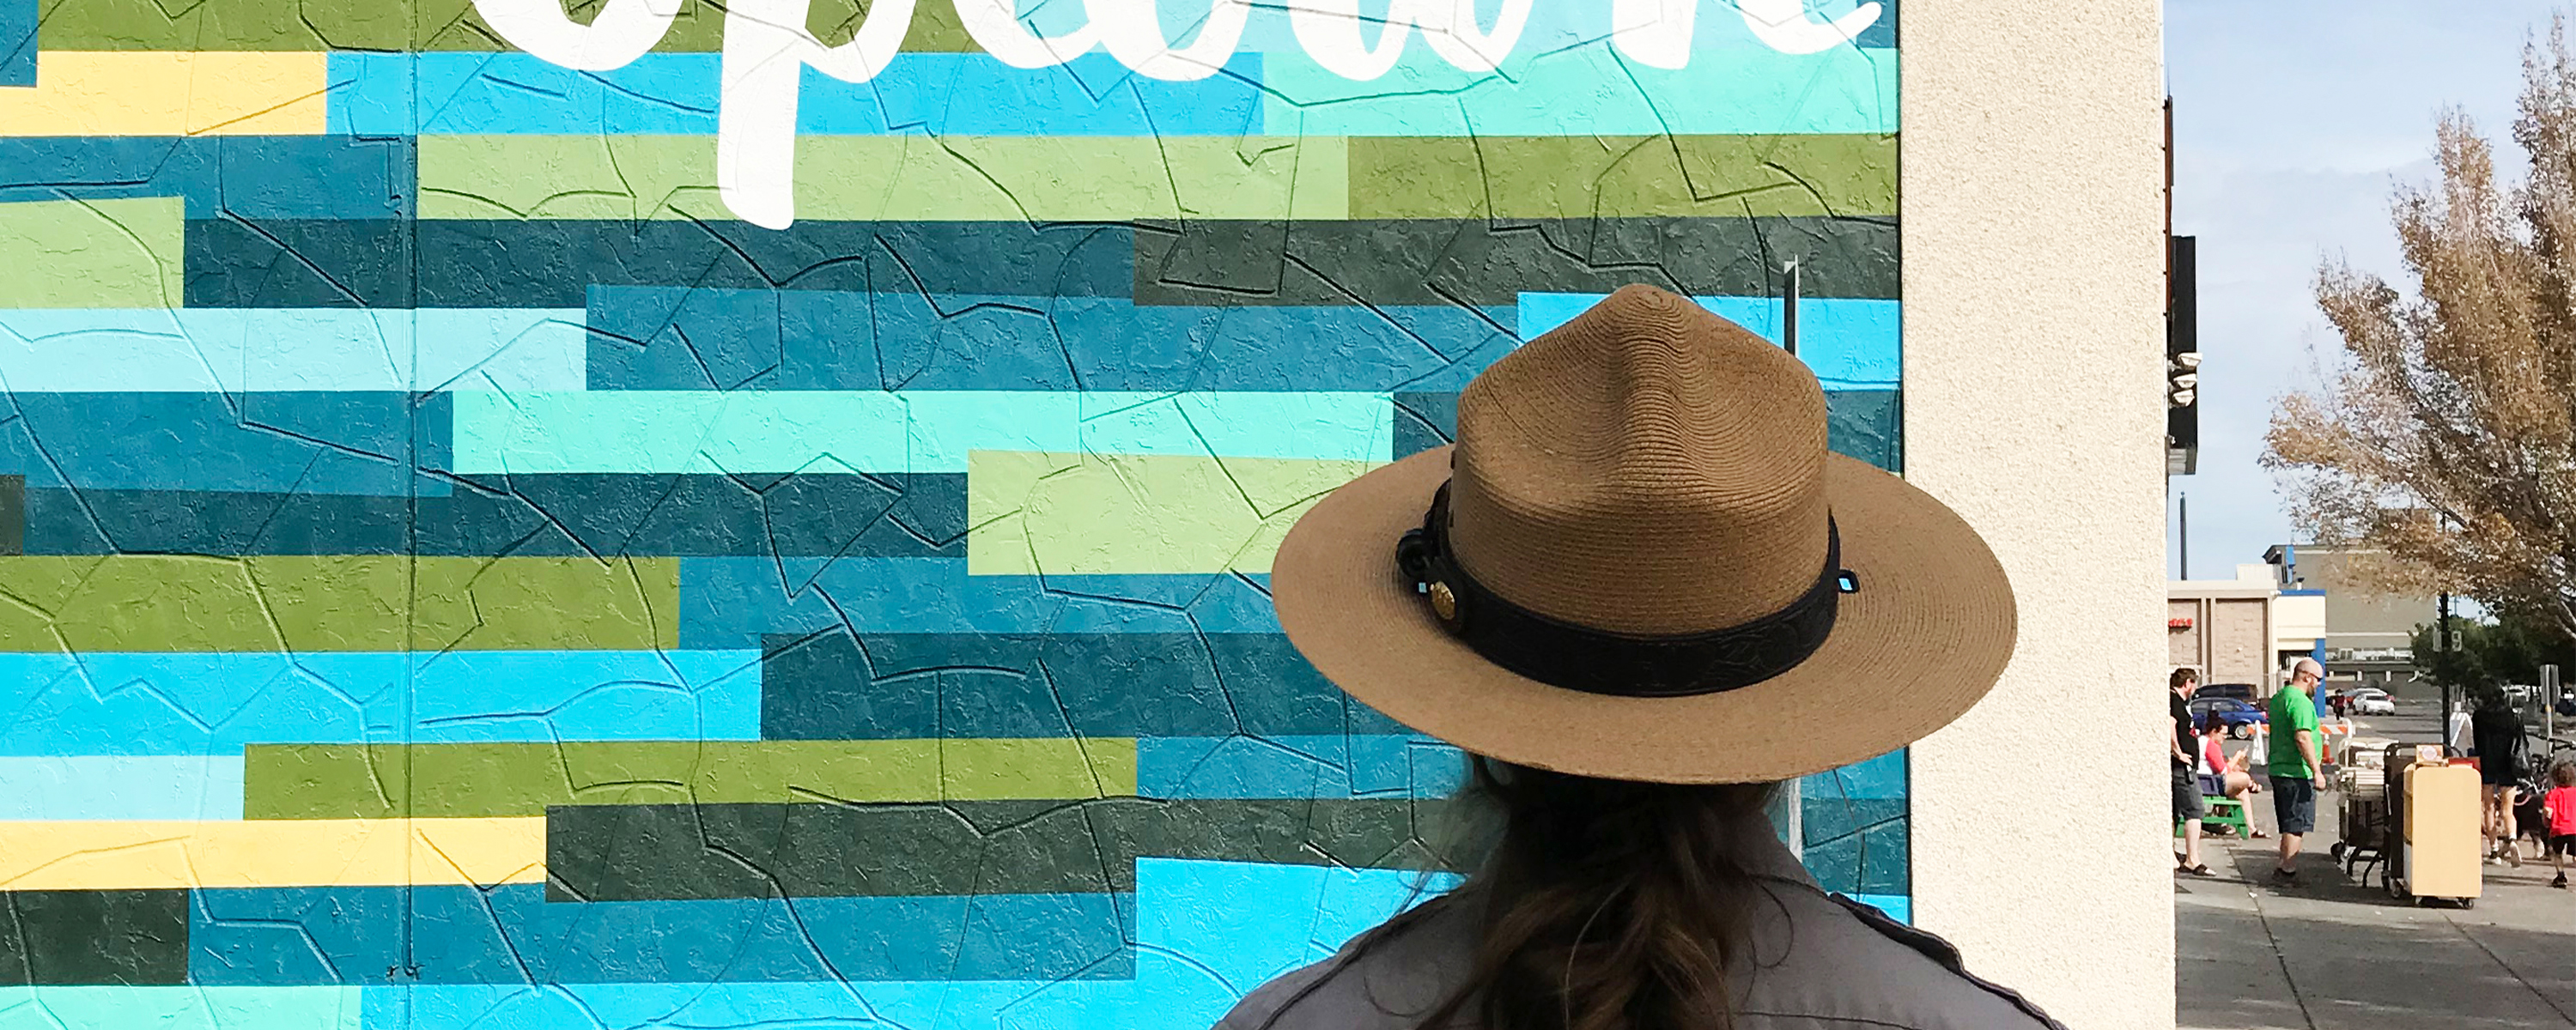 A color photo of a woman in a flat hat standing before a building with the word "Uptown” in white on green and blue block graphic background.